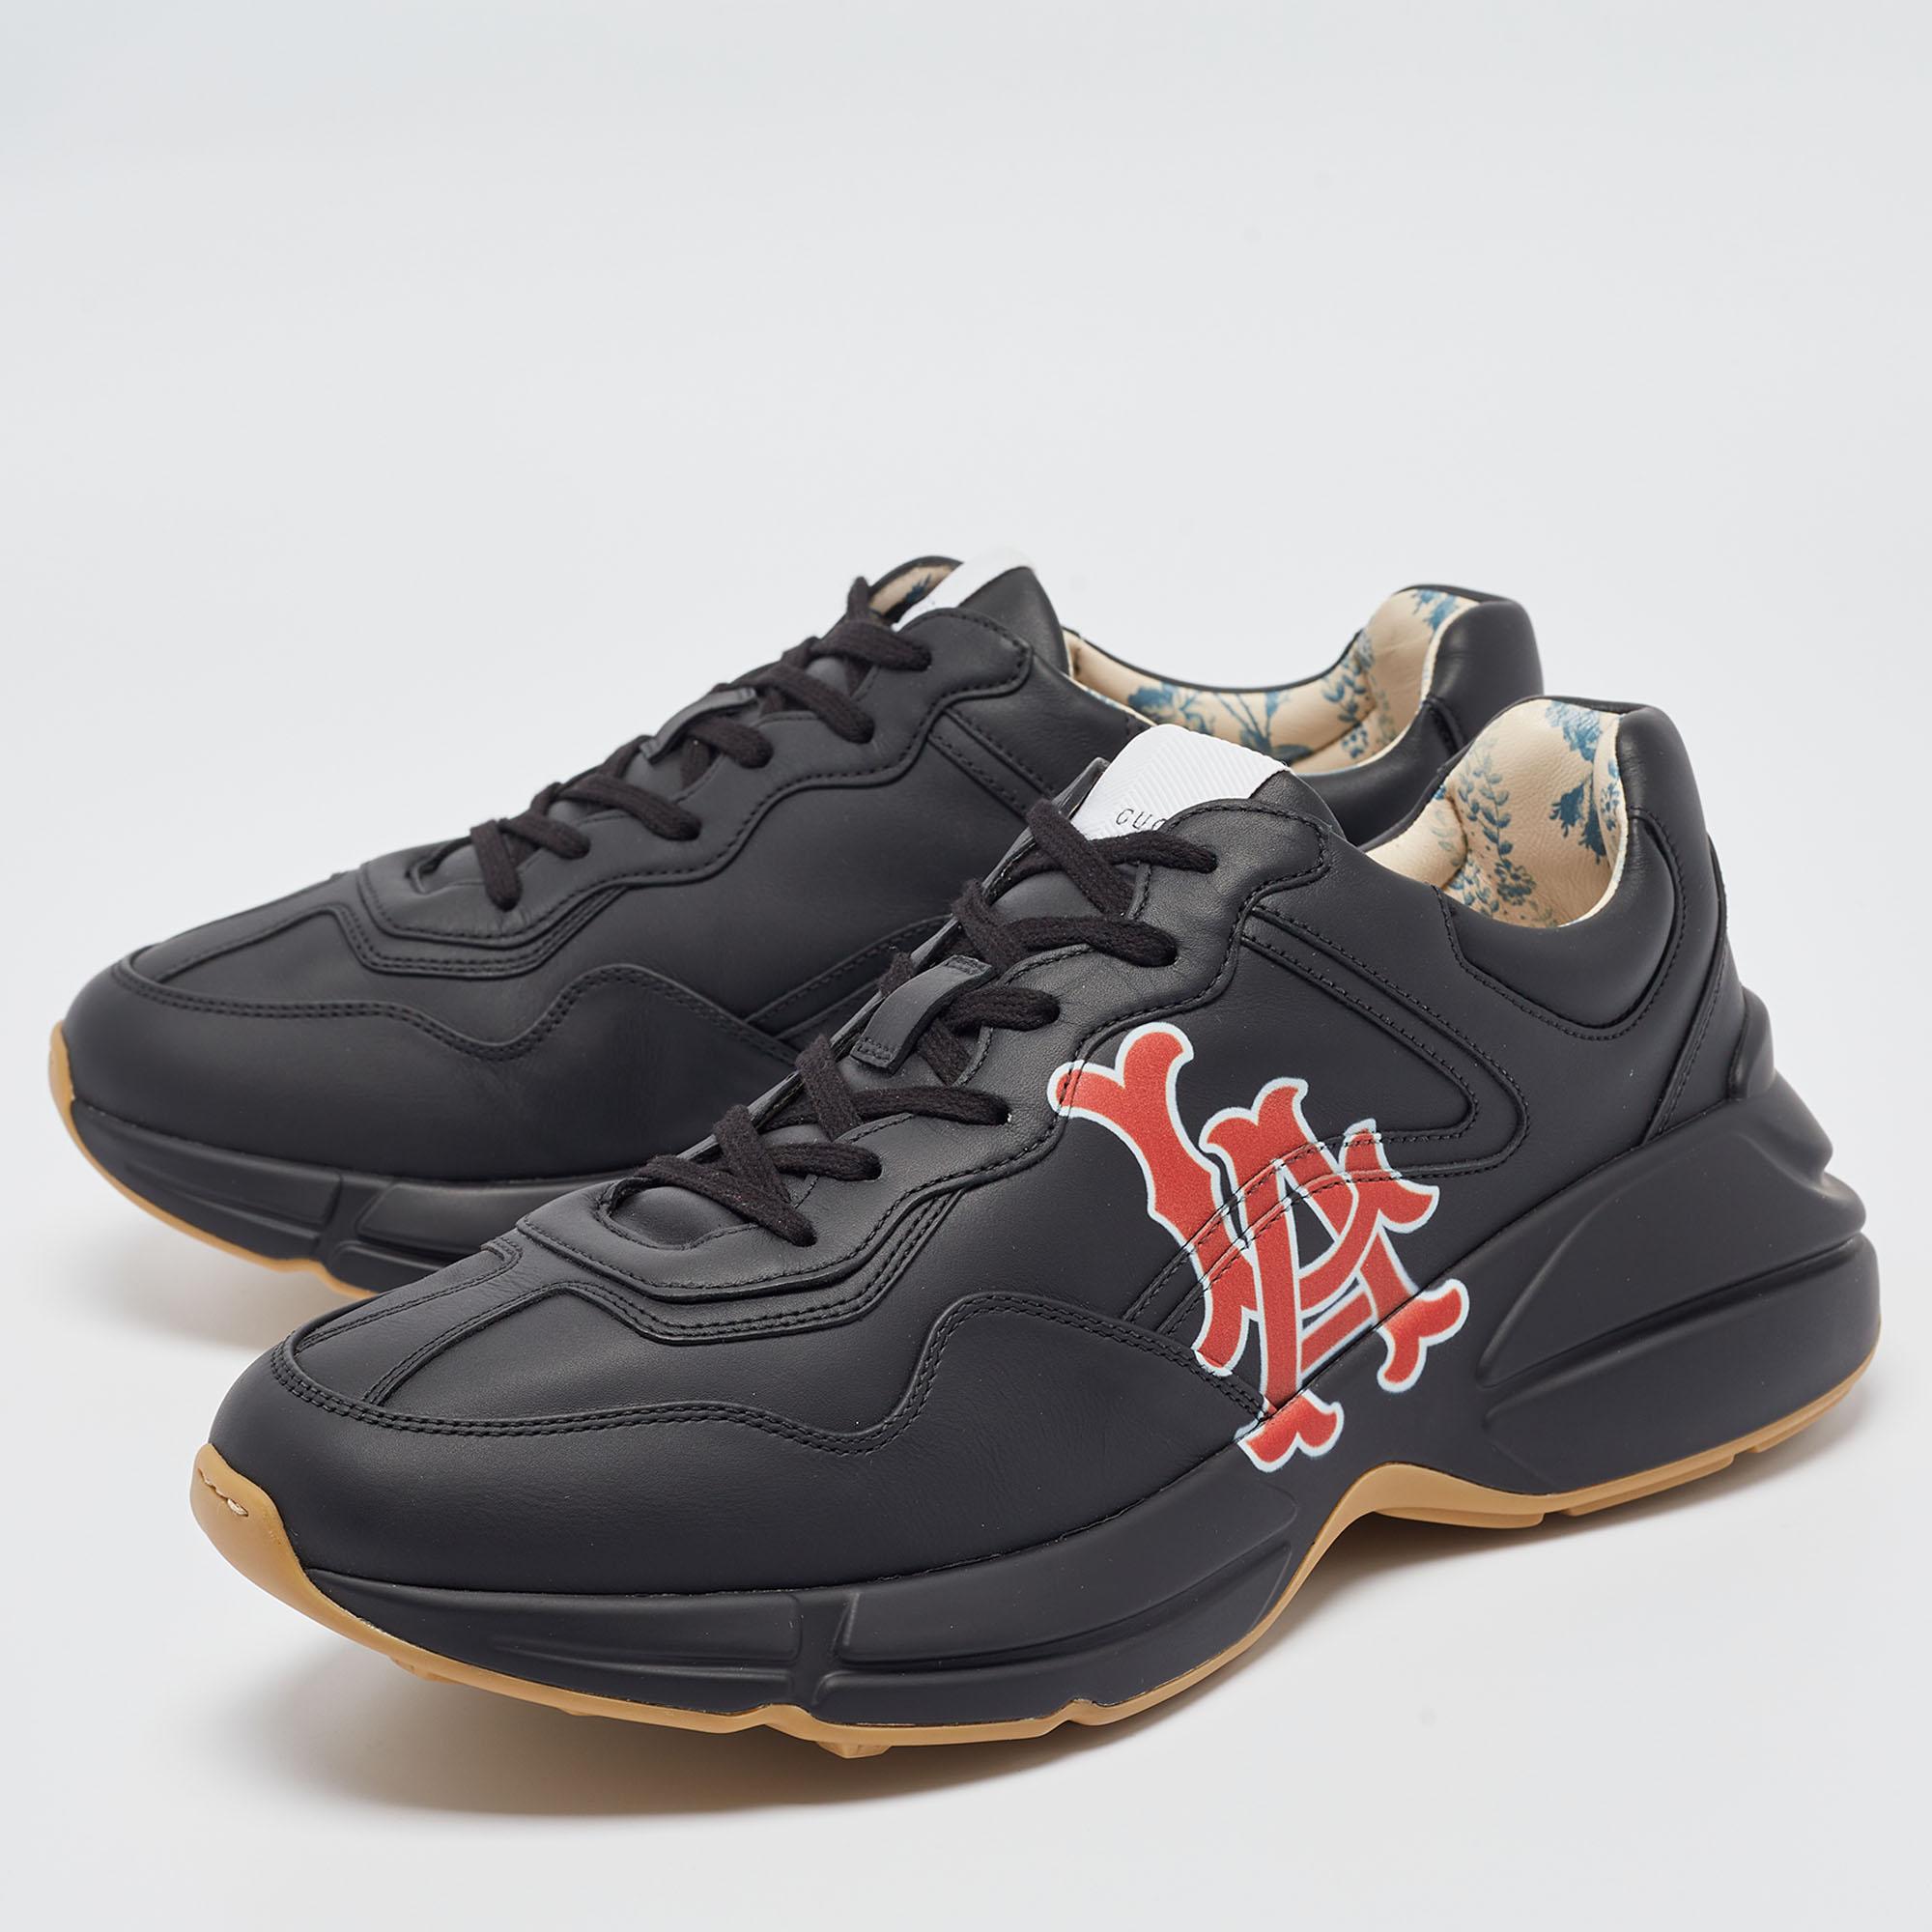 Designed into a chunky size, these Rhyton Gucci sneakers are not just stylish in appeal but also comfortable to wear. Crafted from leather, they are designed with LA Angels prints atop a black background on the sides. Finished off with laces on the